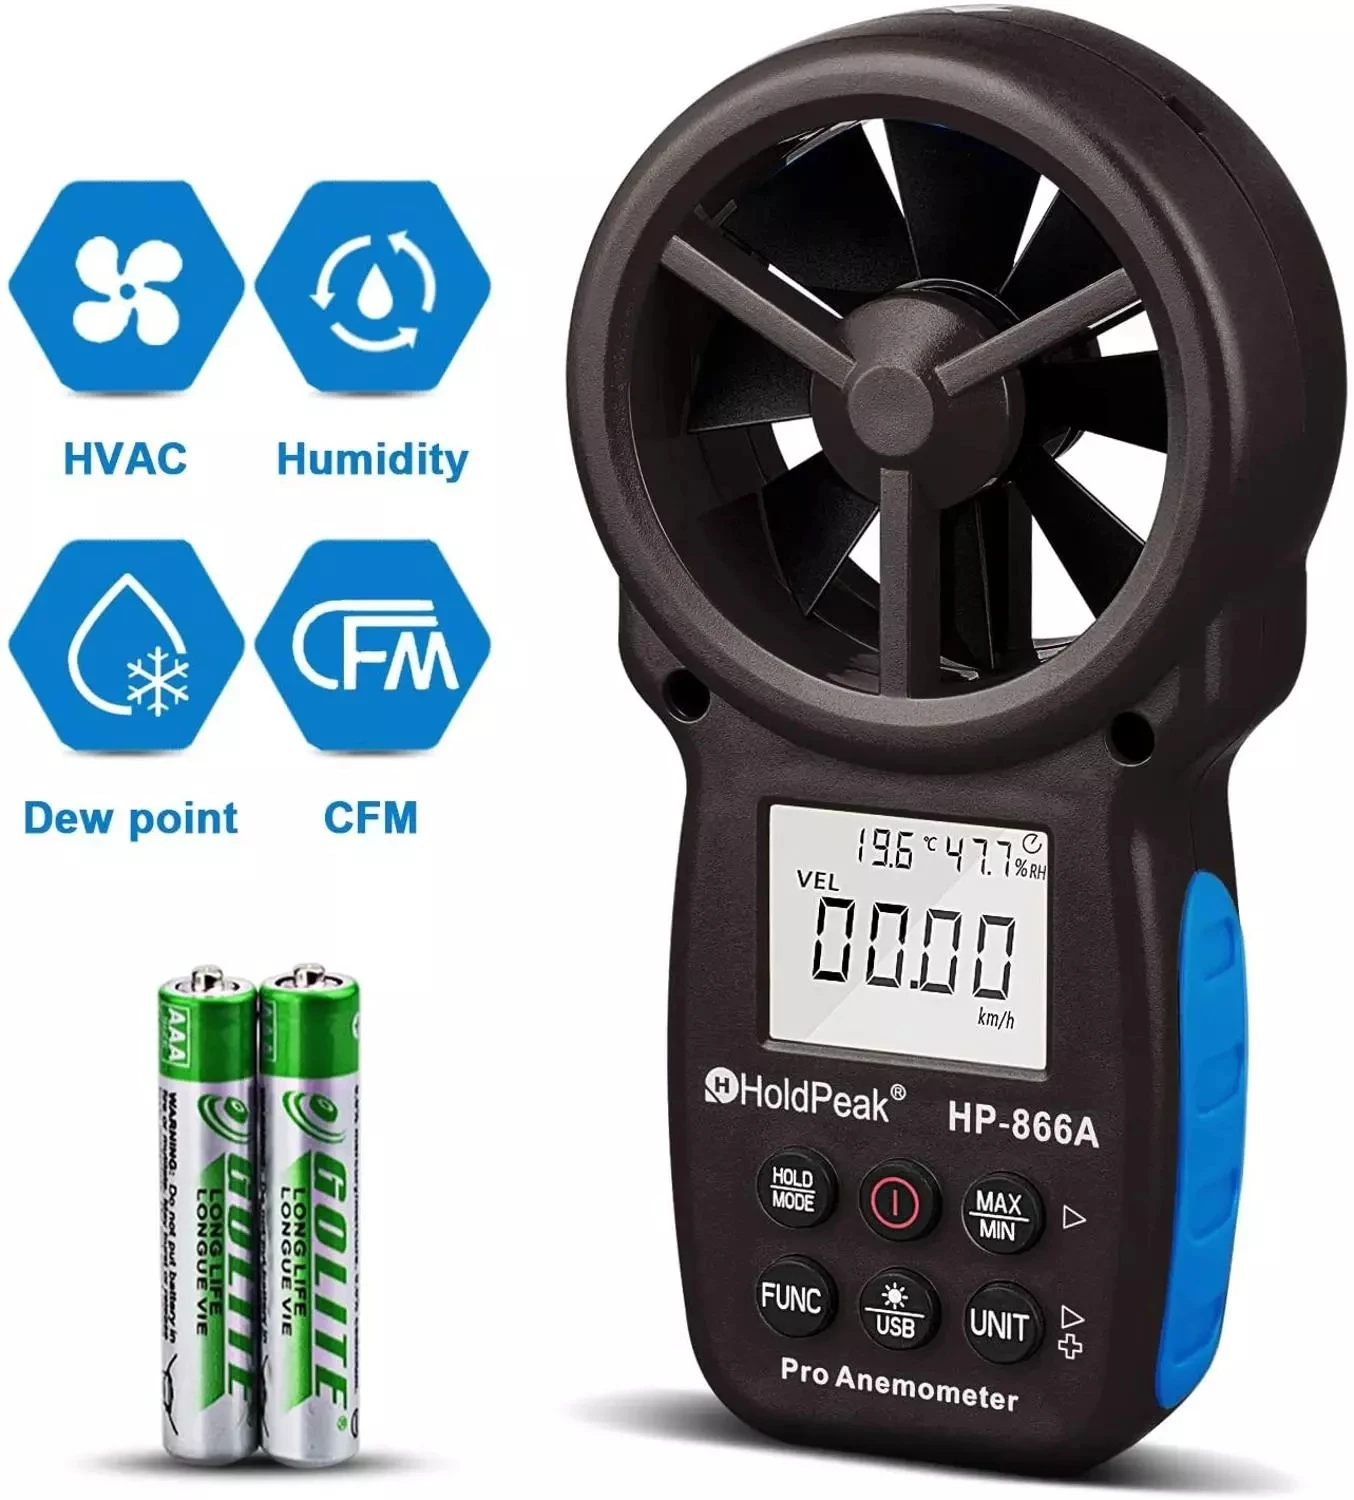 

HoldPeak 866A Digital Anemometer - Wind Speed Meter Measures Wind Speed,Temperature,Wind flow with Data Hold & USB